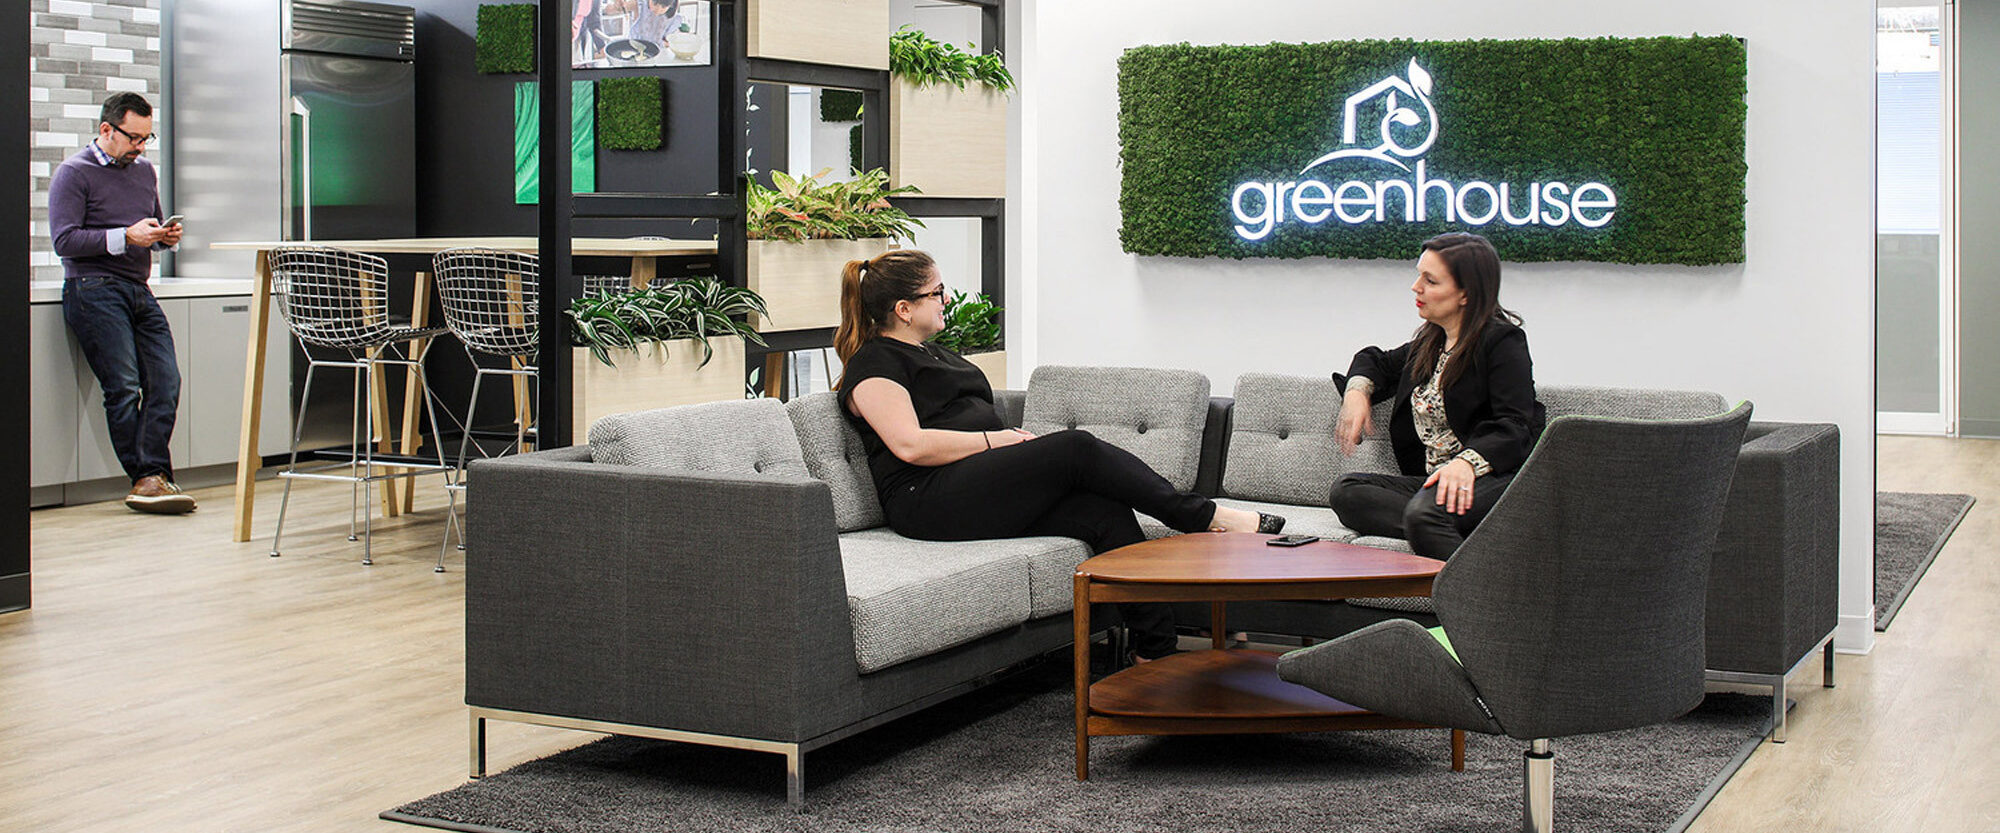 Modern office lounge with plush gray sofas and wooden coffee table. Green wall with company logo enhances biophilic design, while wood accents and clean lines convey contemporary style. Natural light and plants create a welcoming atmosphere for collaboration.